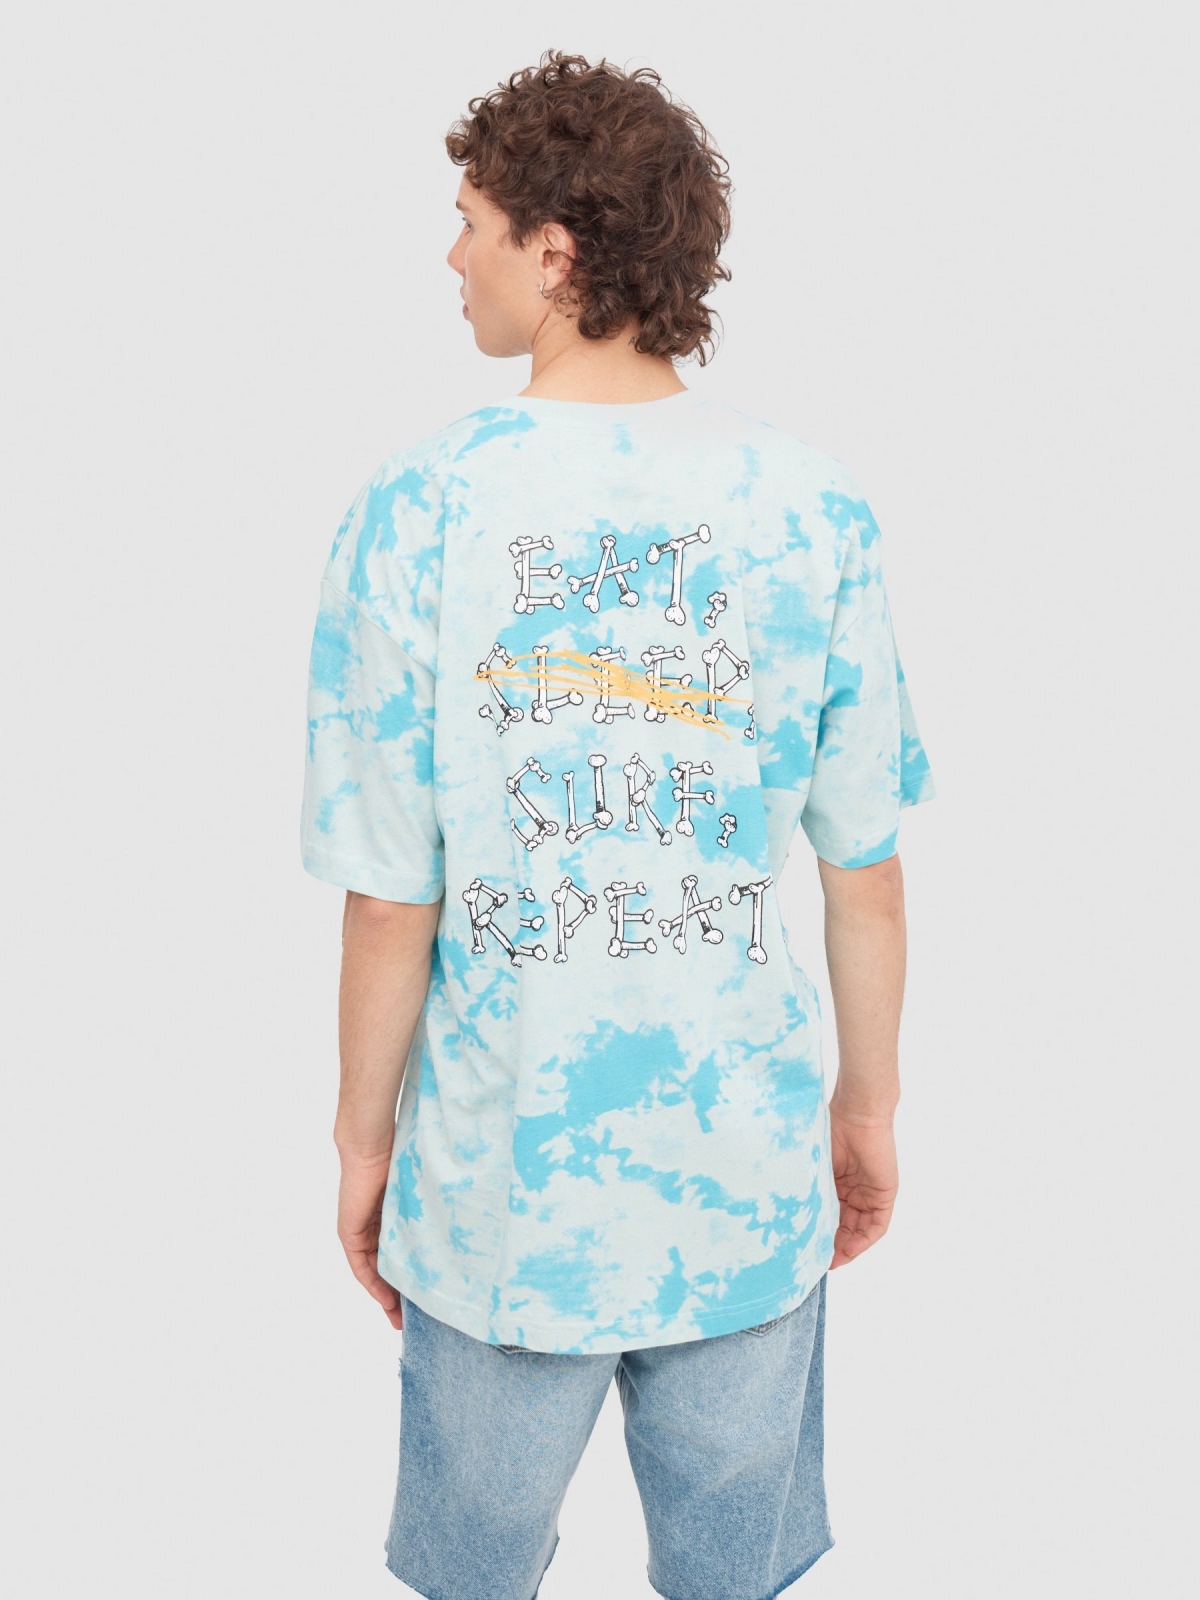 Tie dye surf octopus t-shirt green middle back view